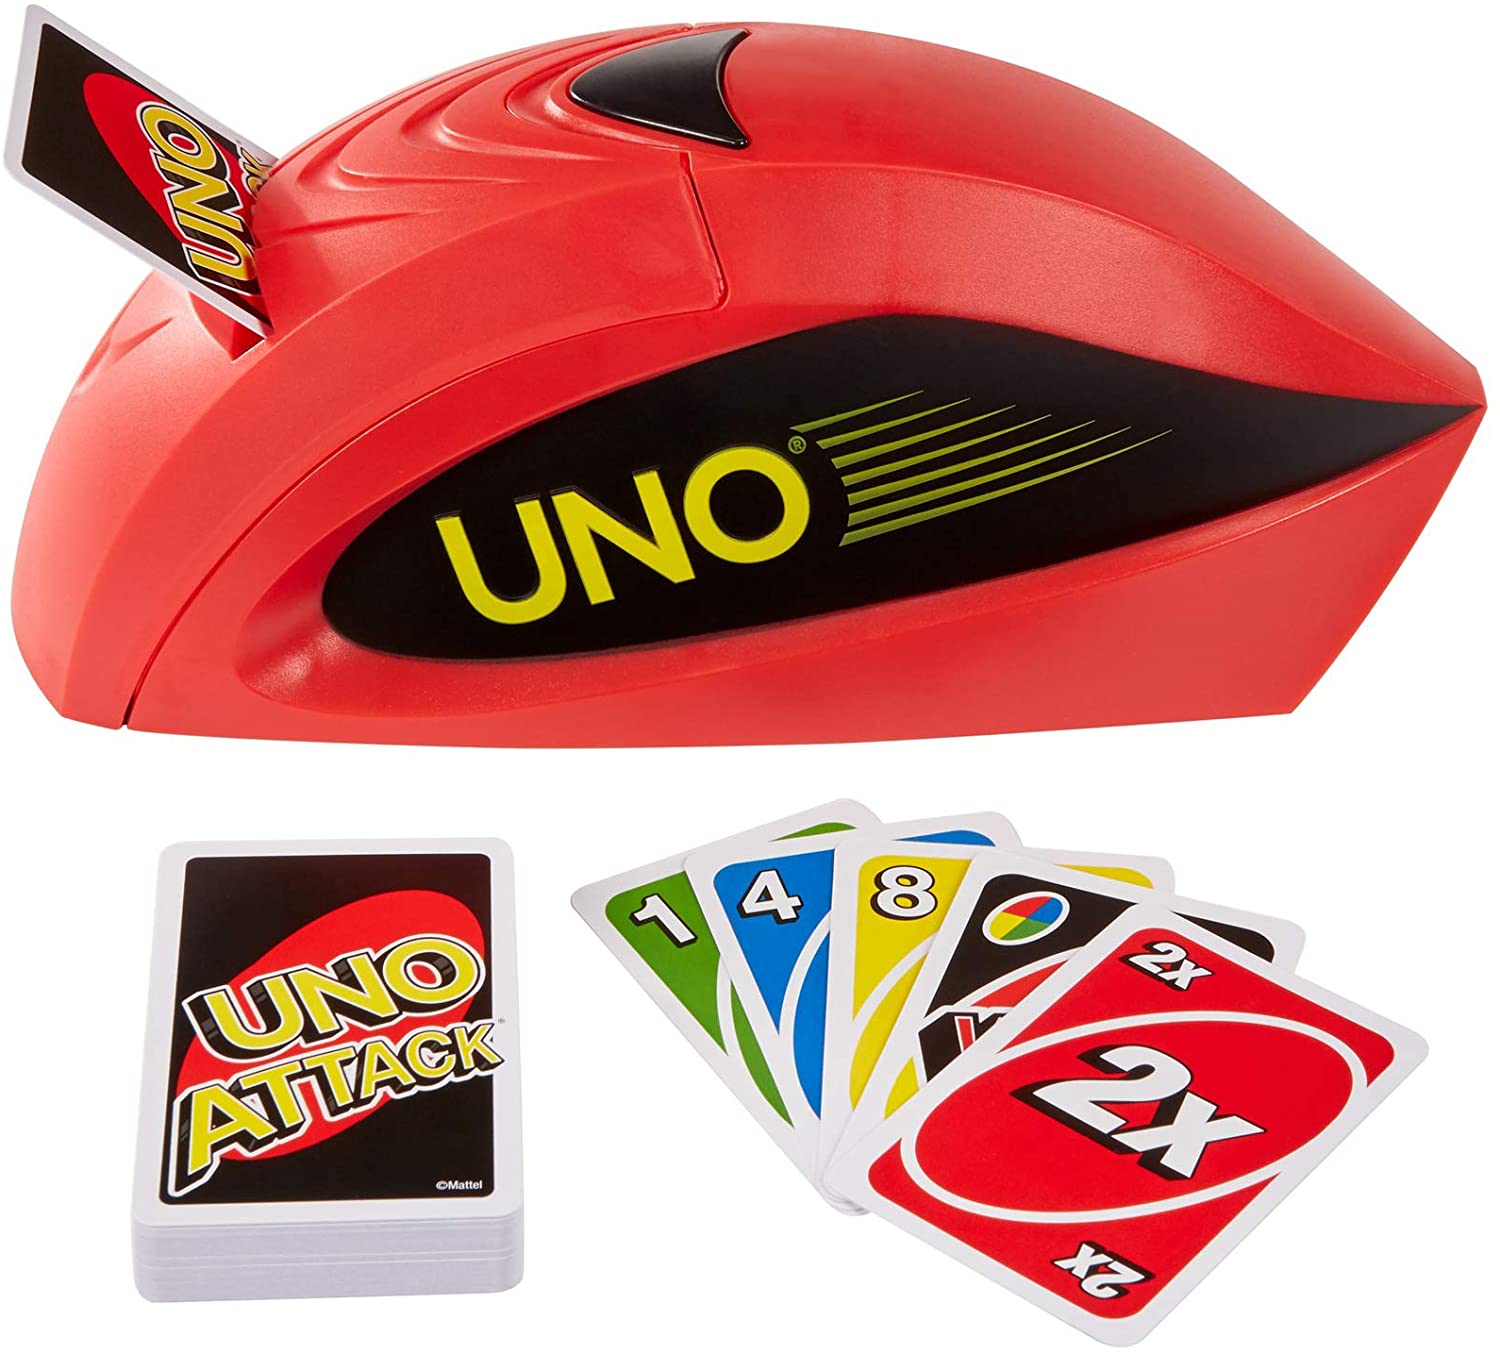 Find out about UNO Attack!